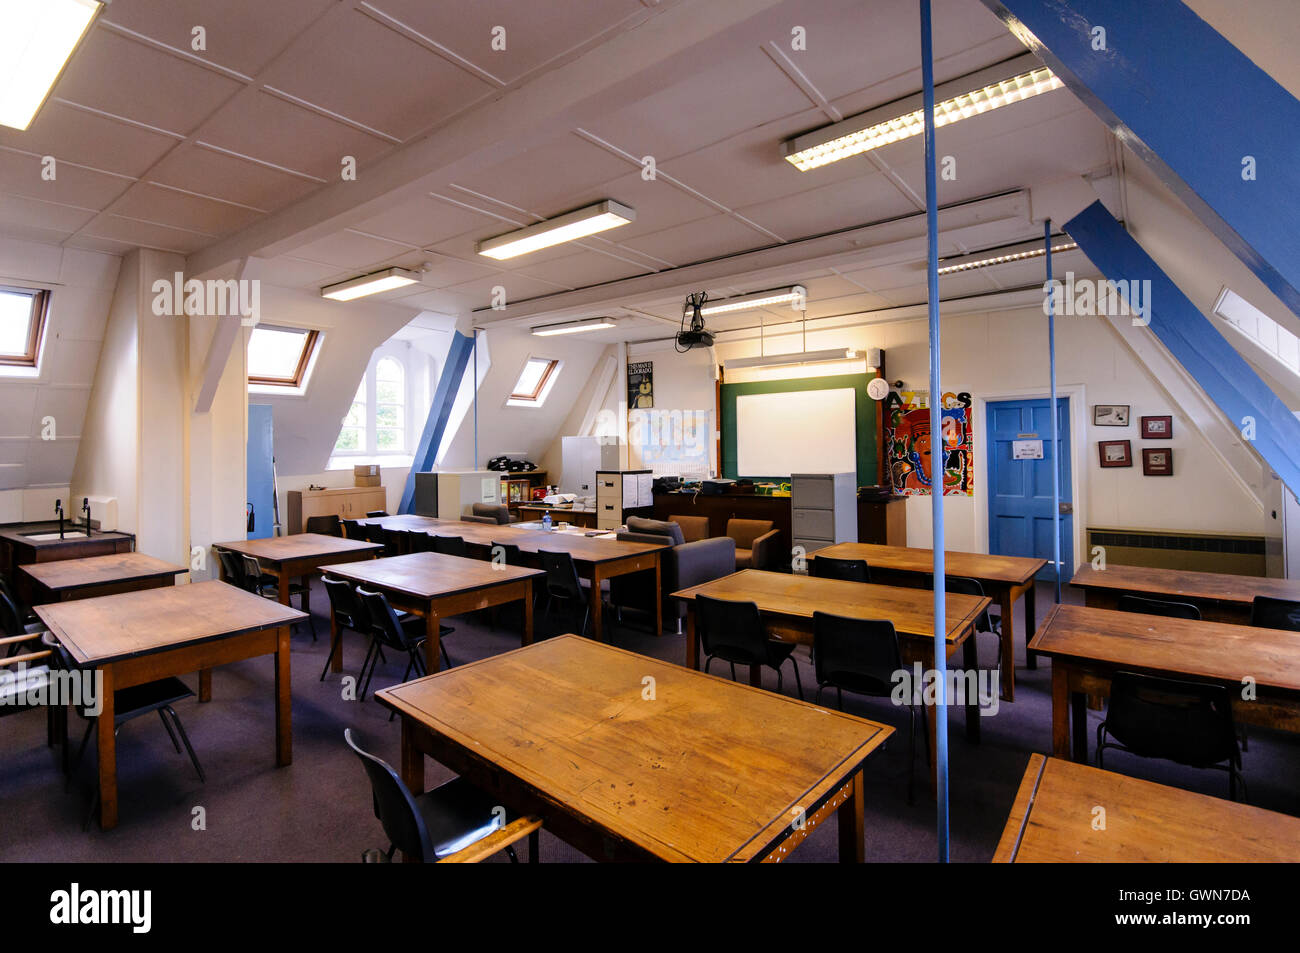 Old wooden desks in a traditional classroom Stock Photo